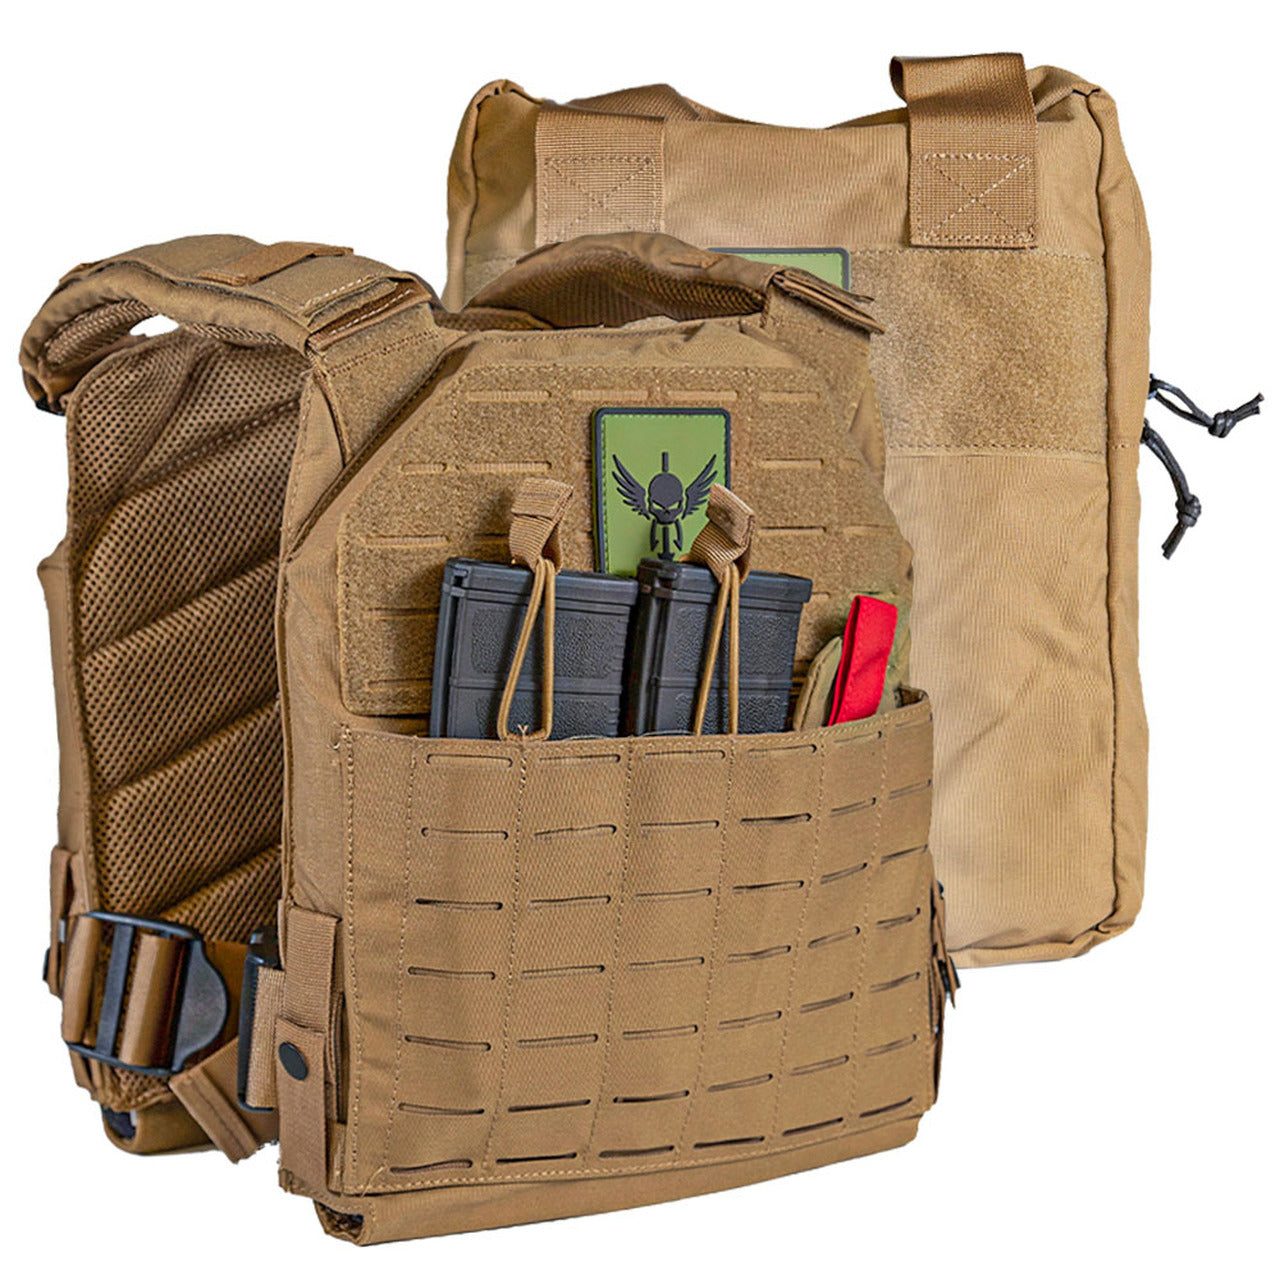 Shellback Tactical Defender 2.0 Active Shooter Kit by Shellback Tactical.